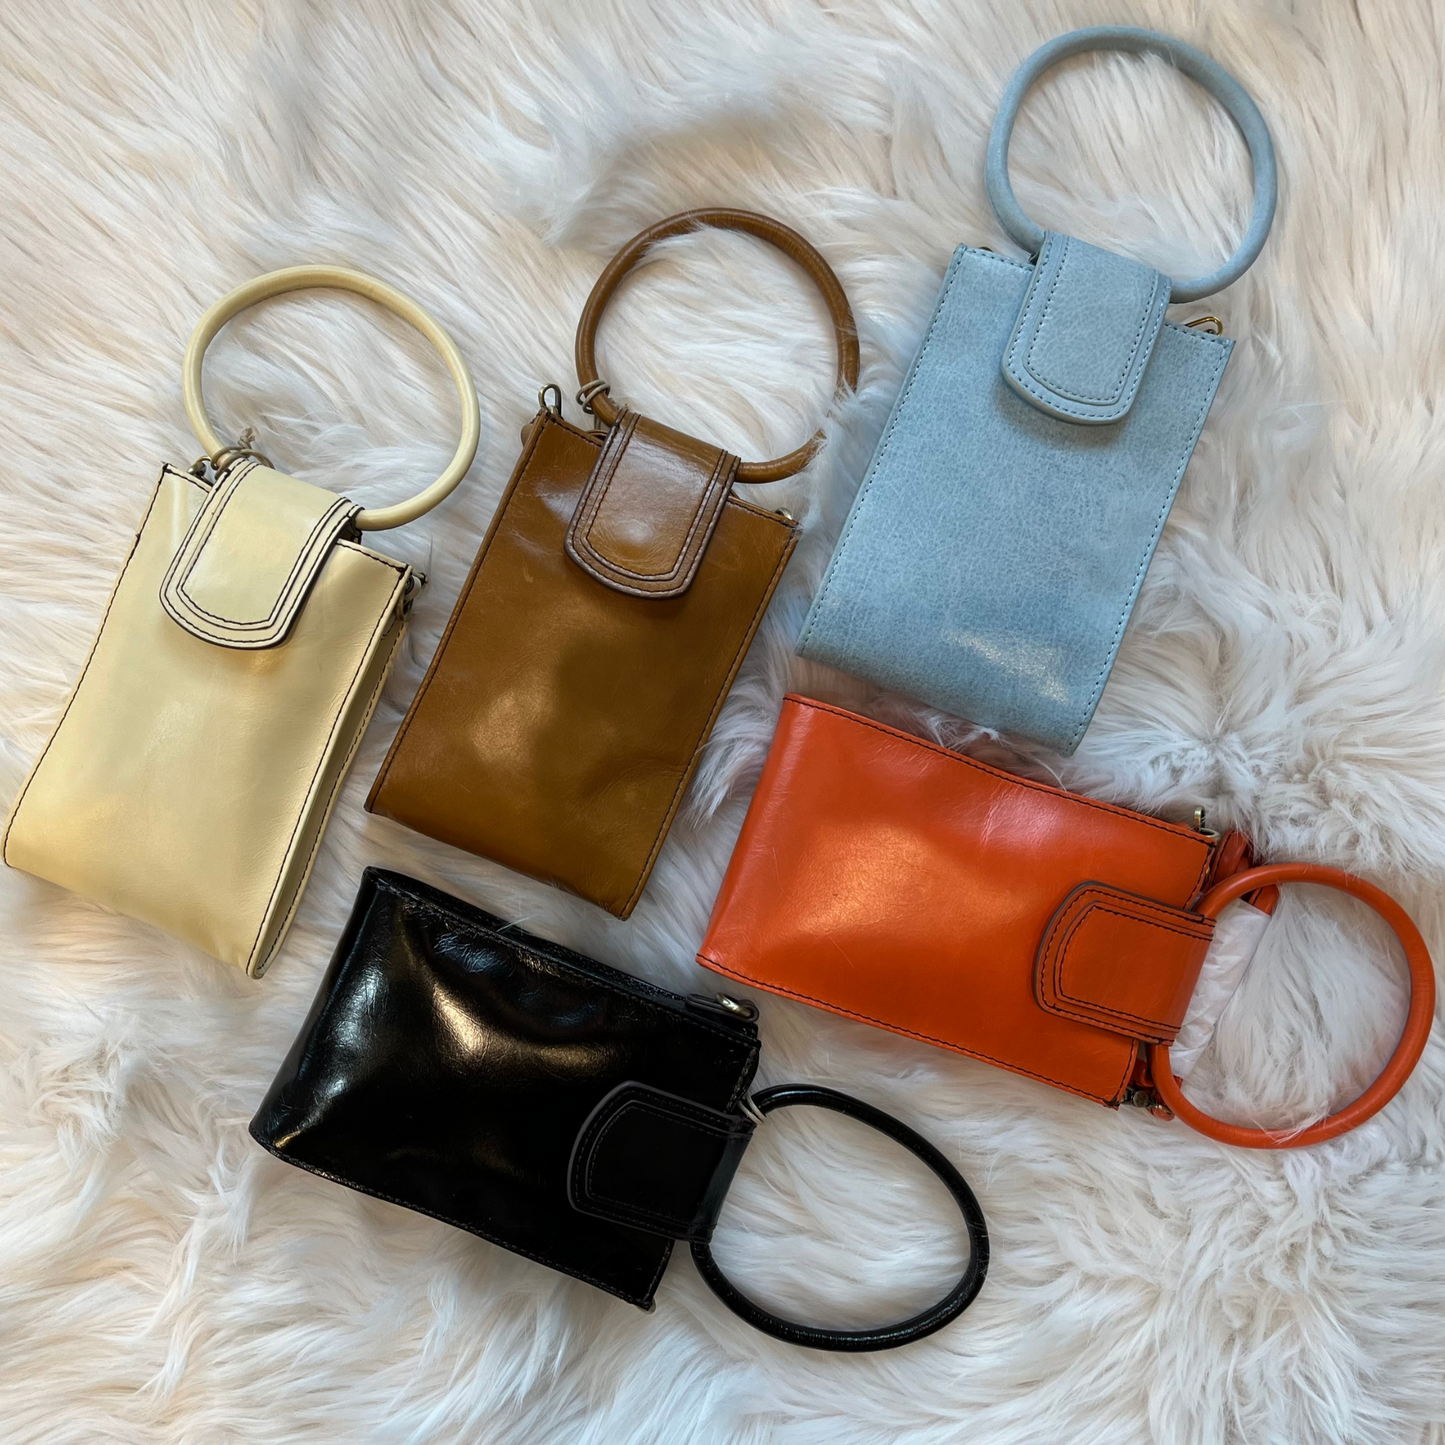 A grouping of 5 Sheila Phone Crossbody bags, 3 across the top and the 2 on the bottom. They are pictured on a white fur rug. There are 5 colours, Butter, Truffle, Blue Topaz, Black and Zinnia. The bags are shown without the optional crossbody strap.